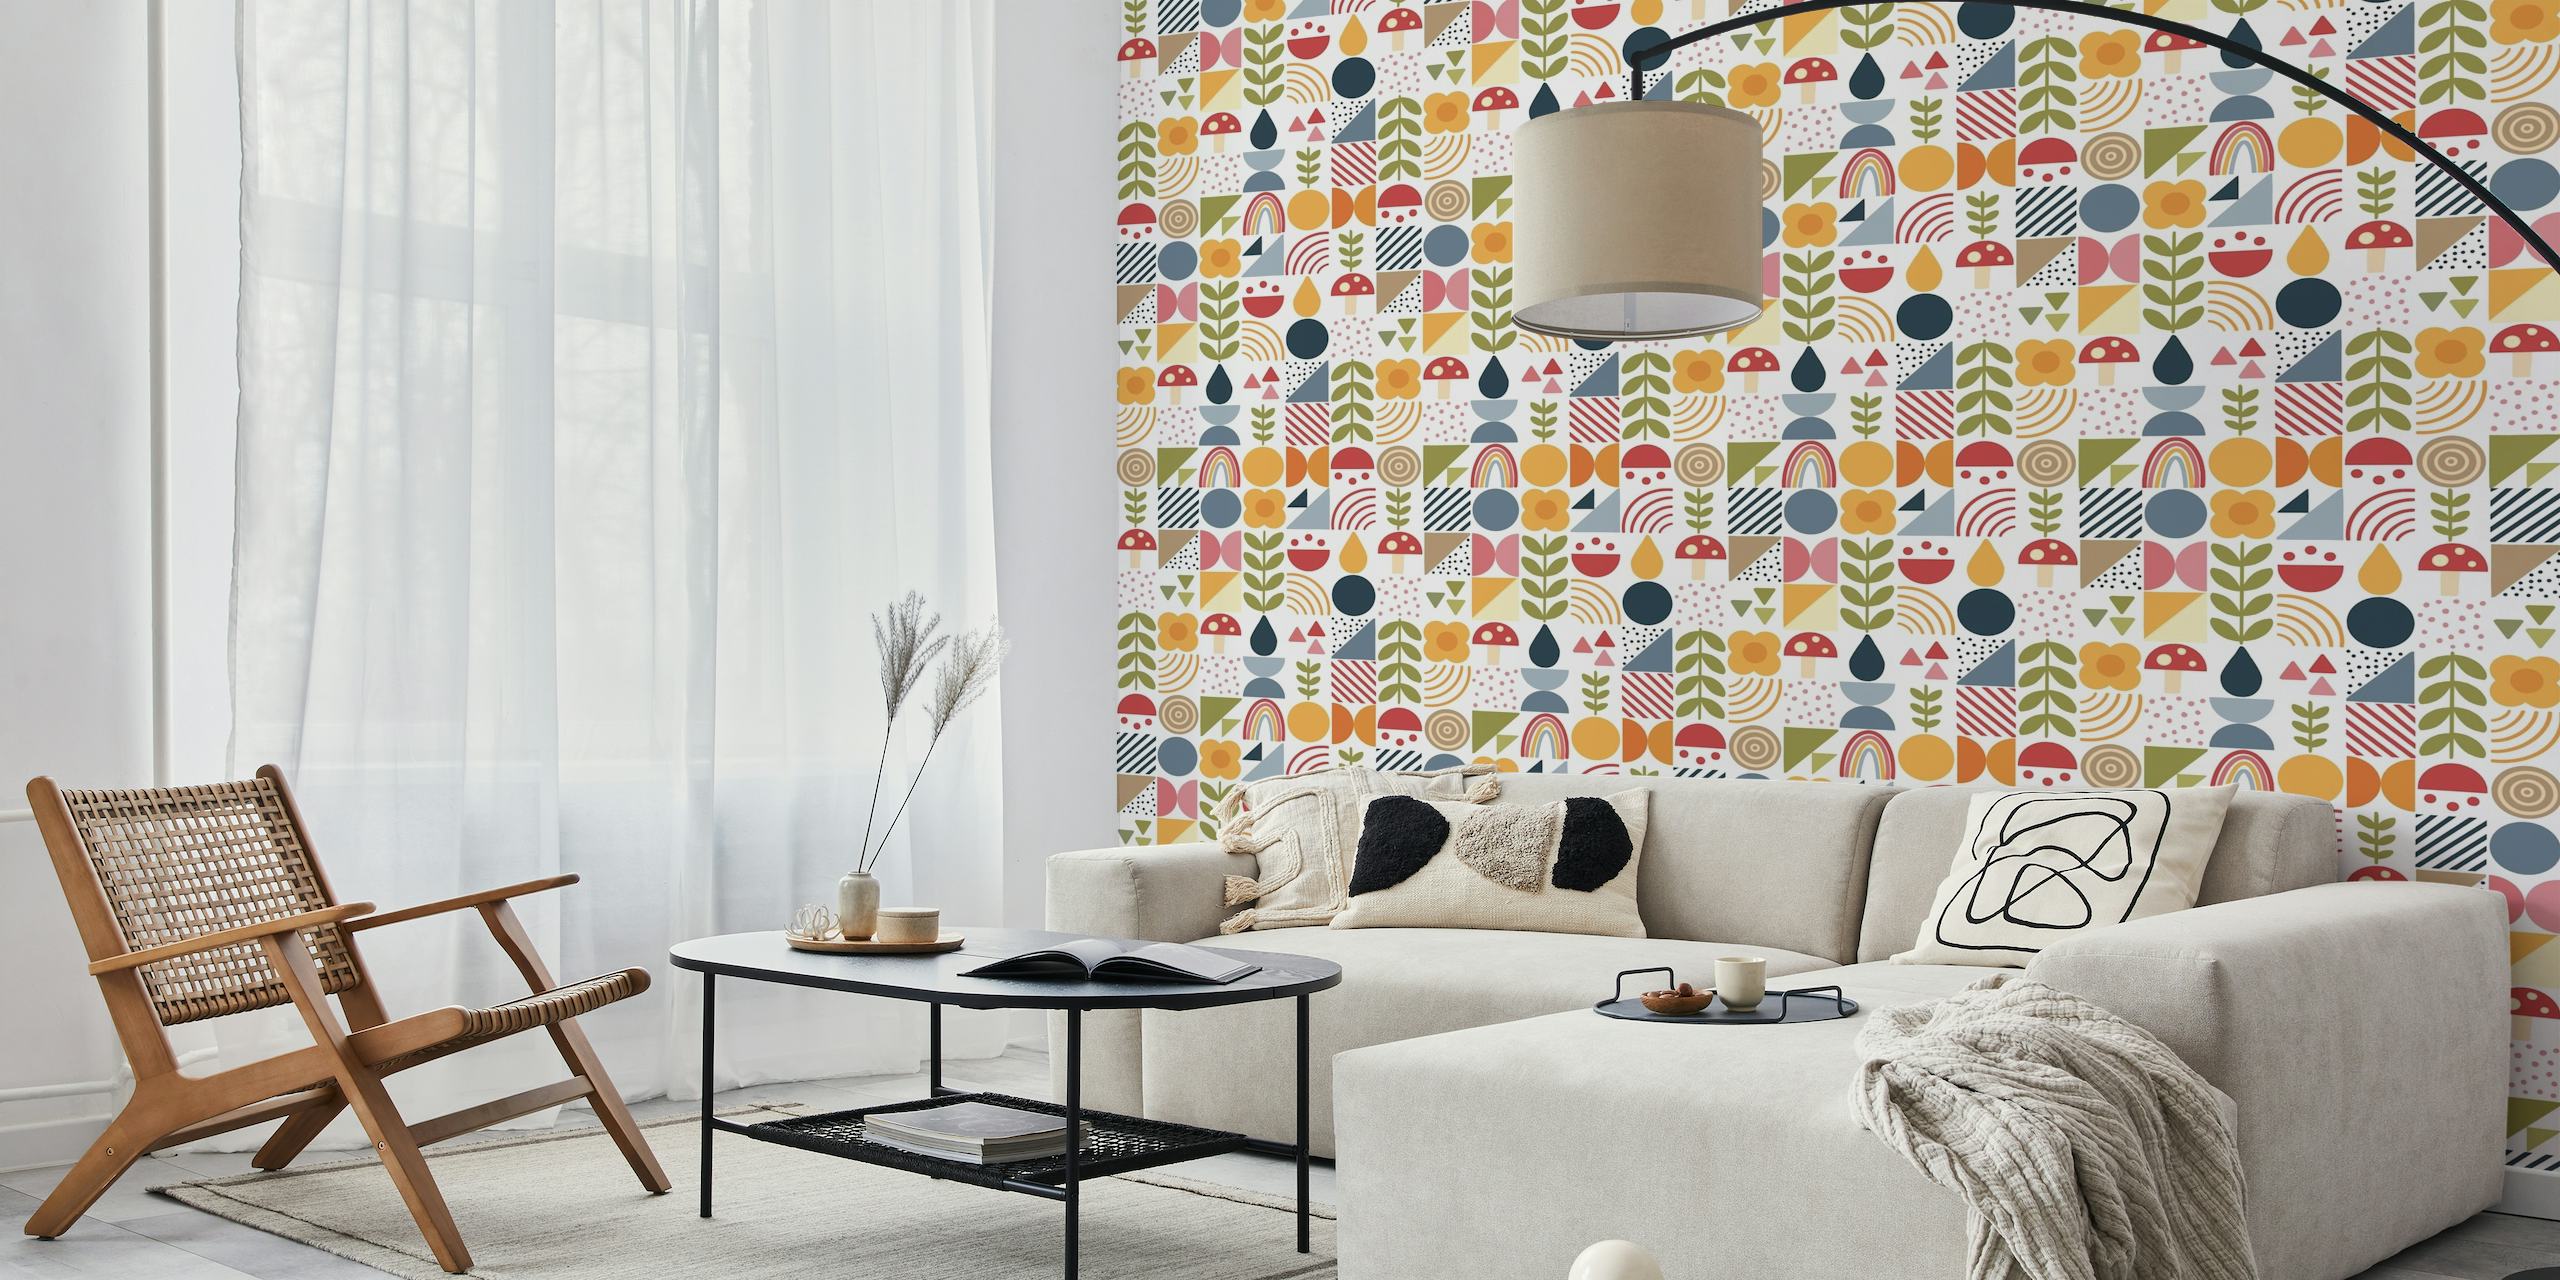 Stylized geometric and organic shapes wall mural with colorful patterns